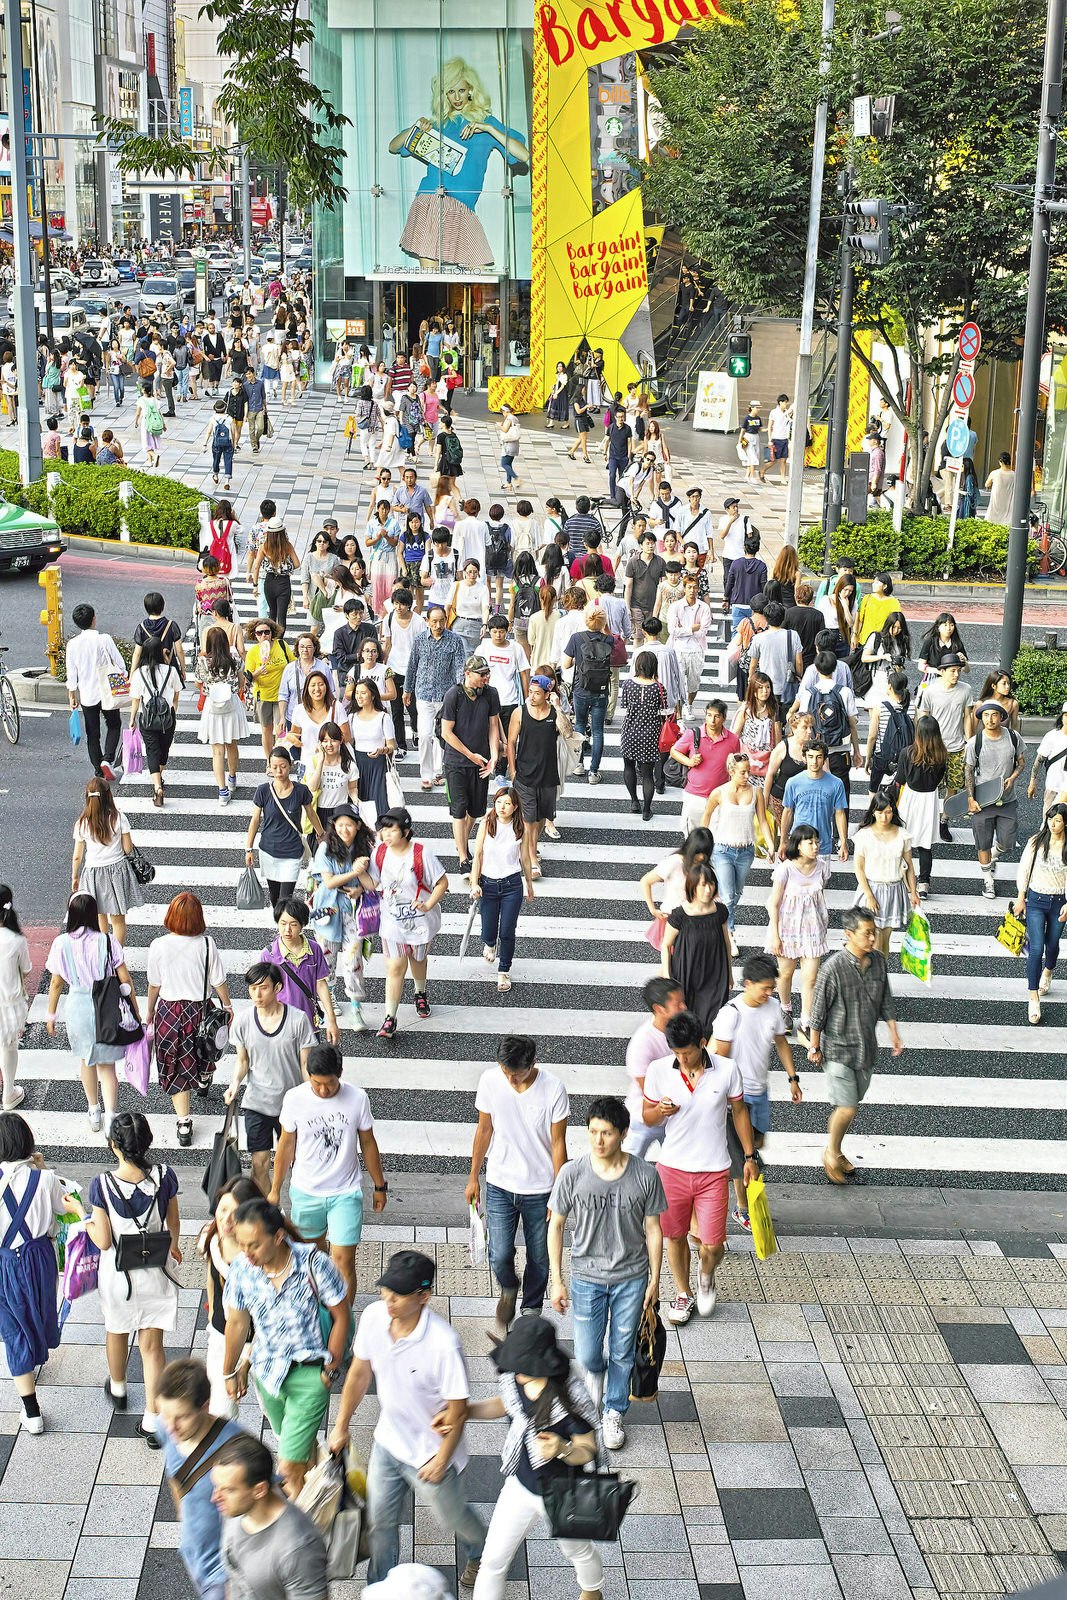 A large group of people walk across a crowded street in Harajuku shopping district 